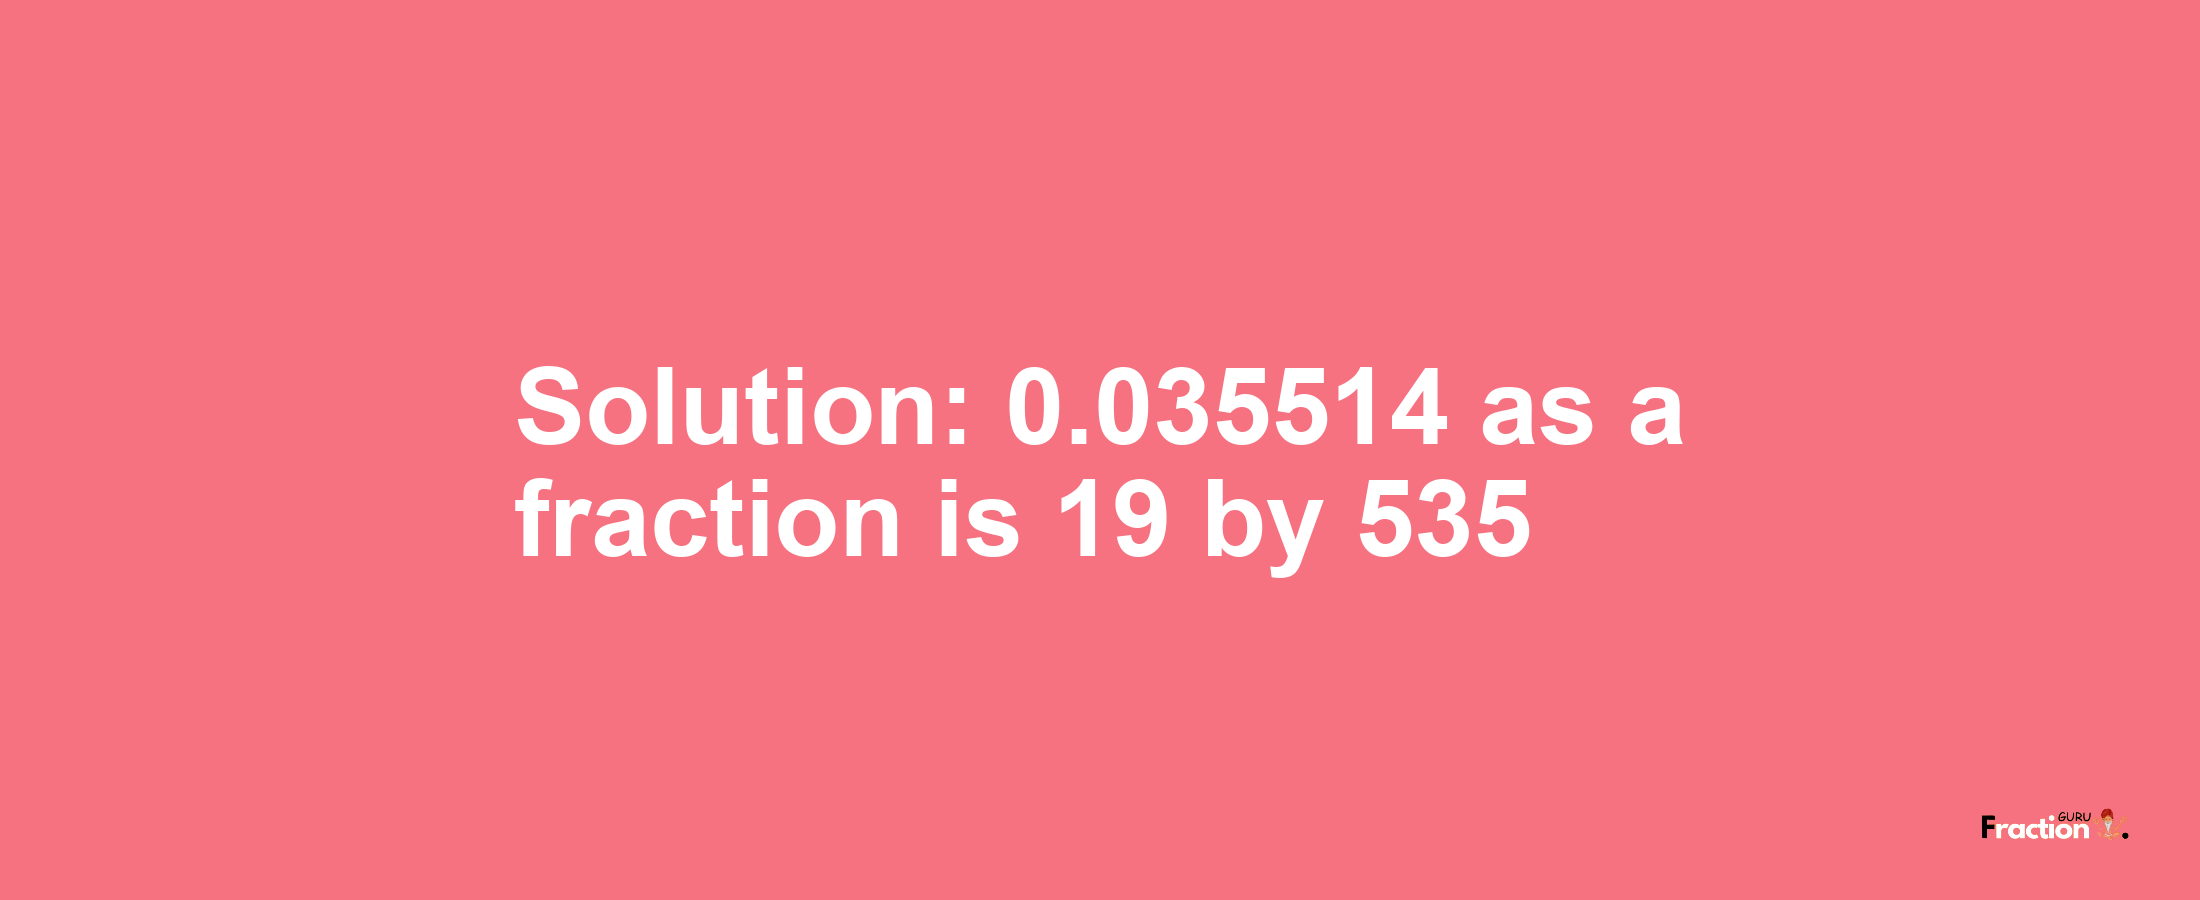 Solution:0.035514 as a fraction is 19/535